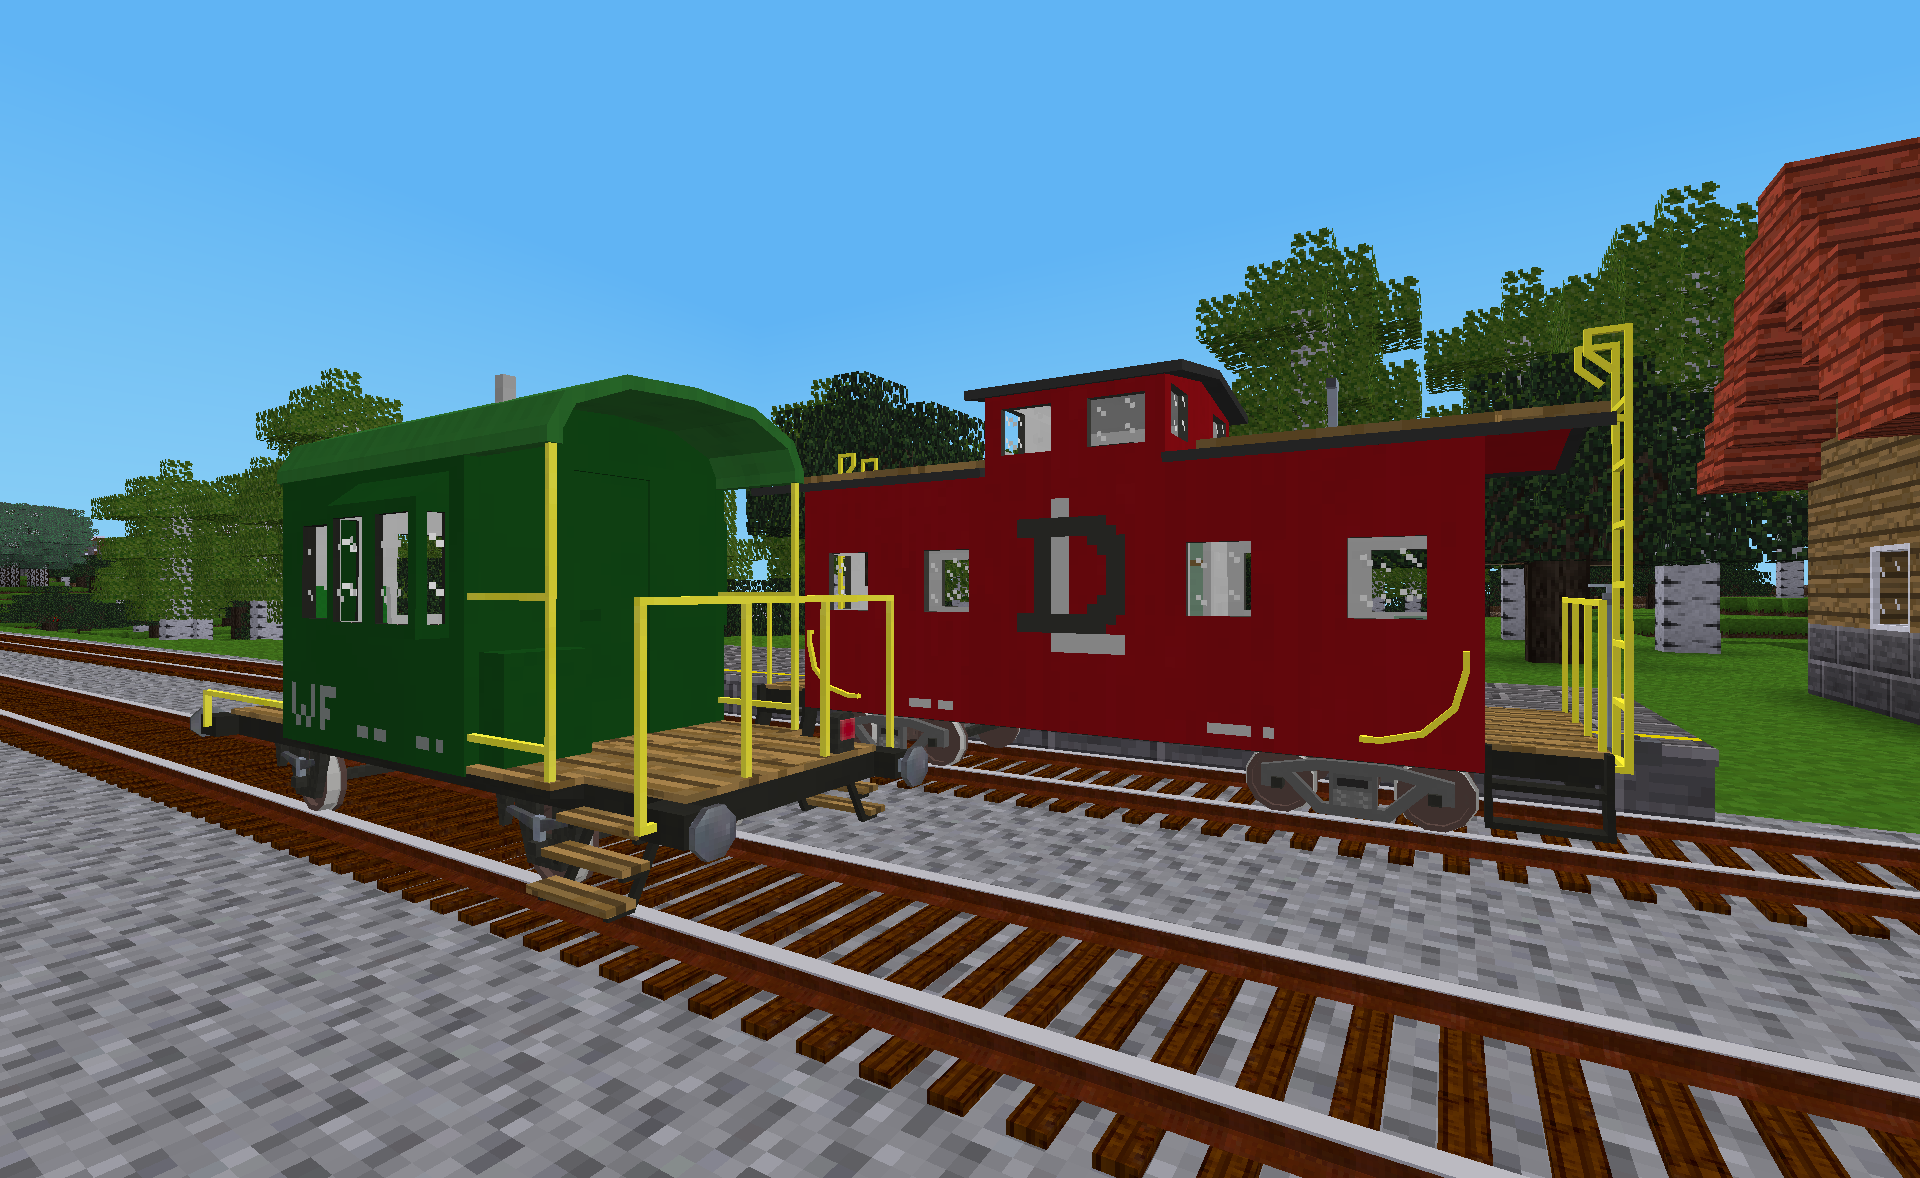 European Escort Wagon and Wooden Caboose with Cupola